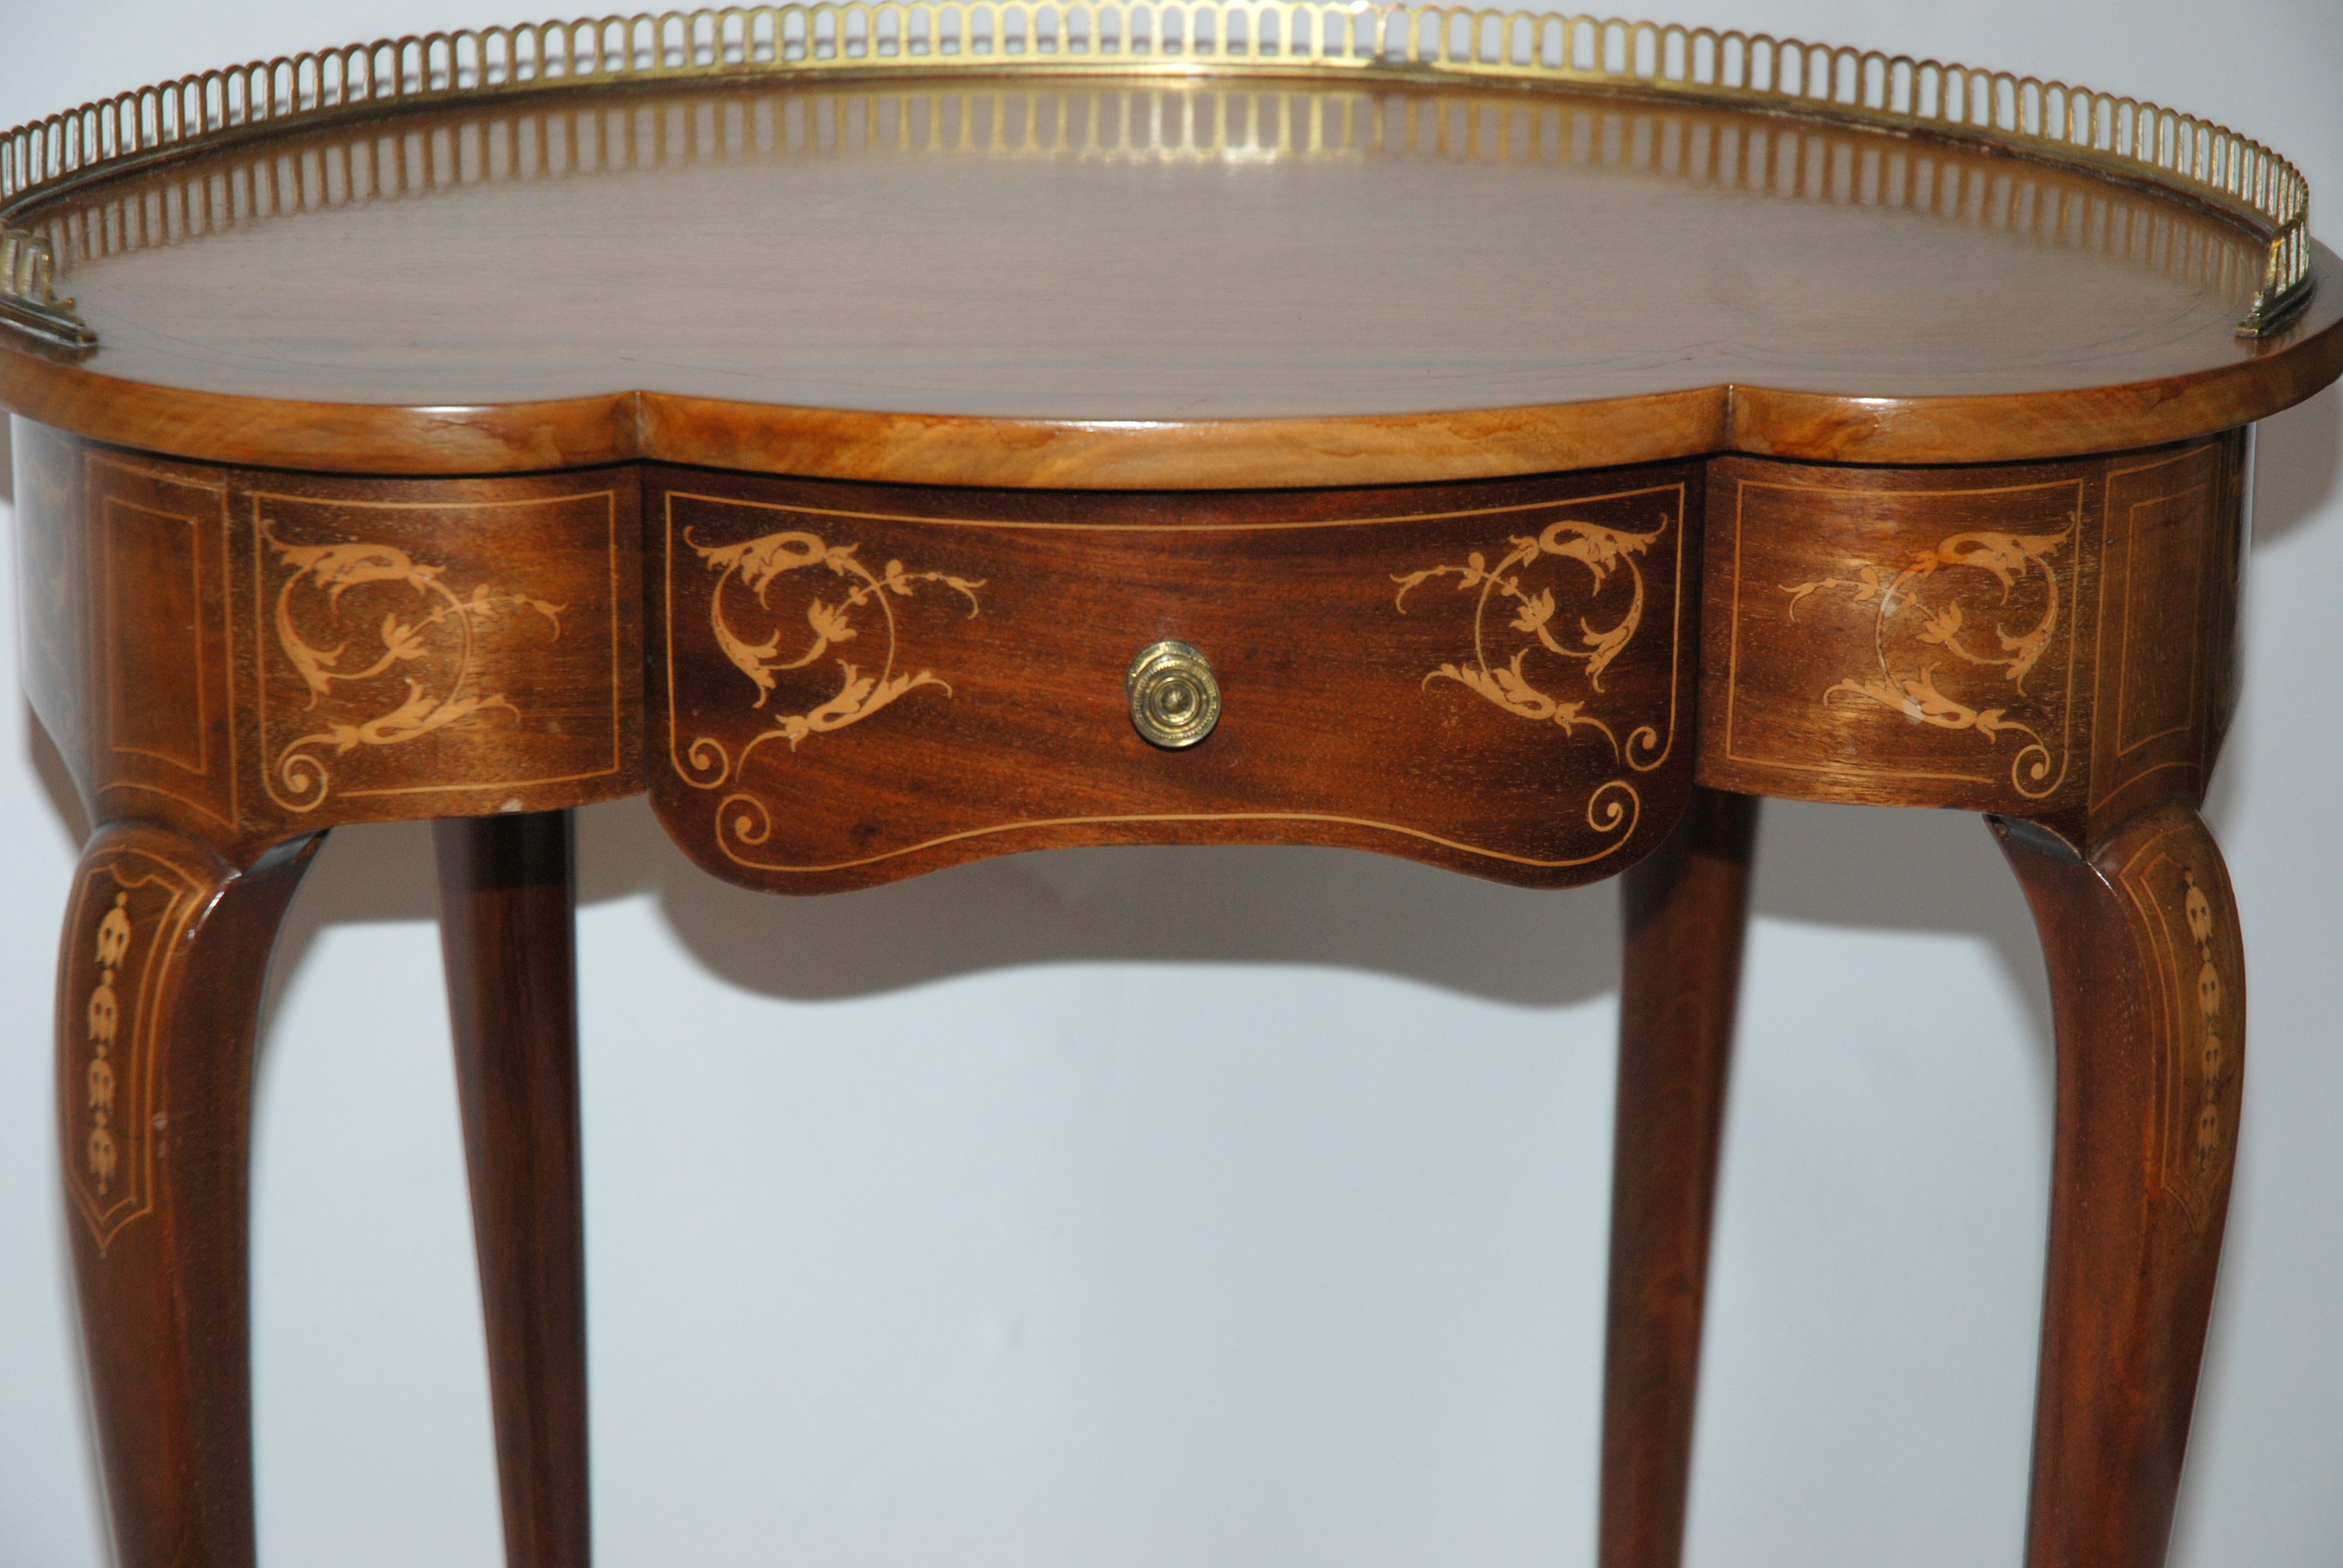 An Edwardian rosewood and inlaid kidney shaped ladies writing desk with three quarter brass - Image 3 of 4